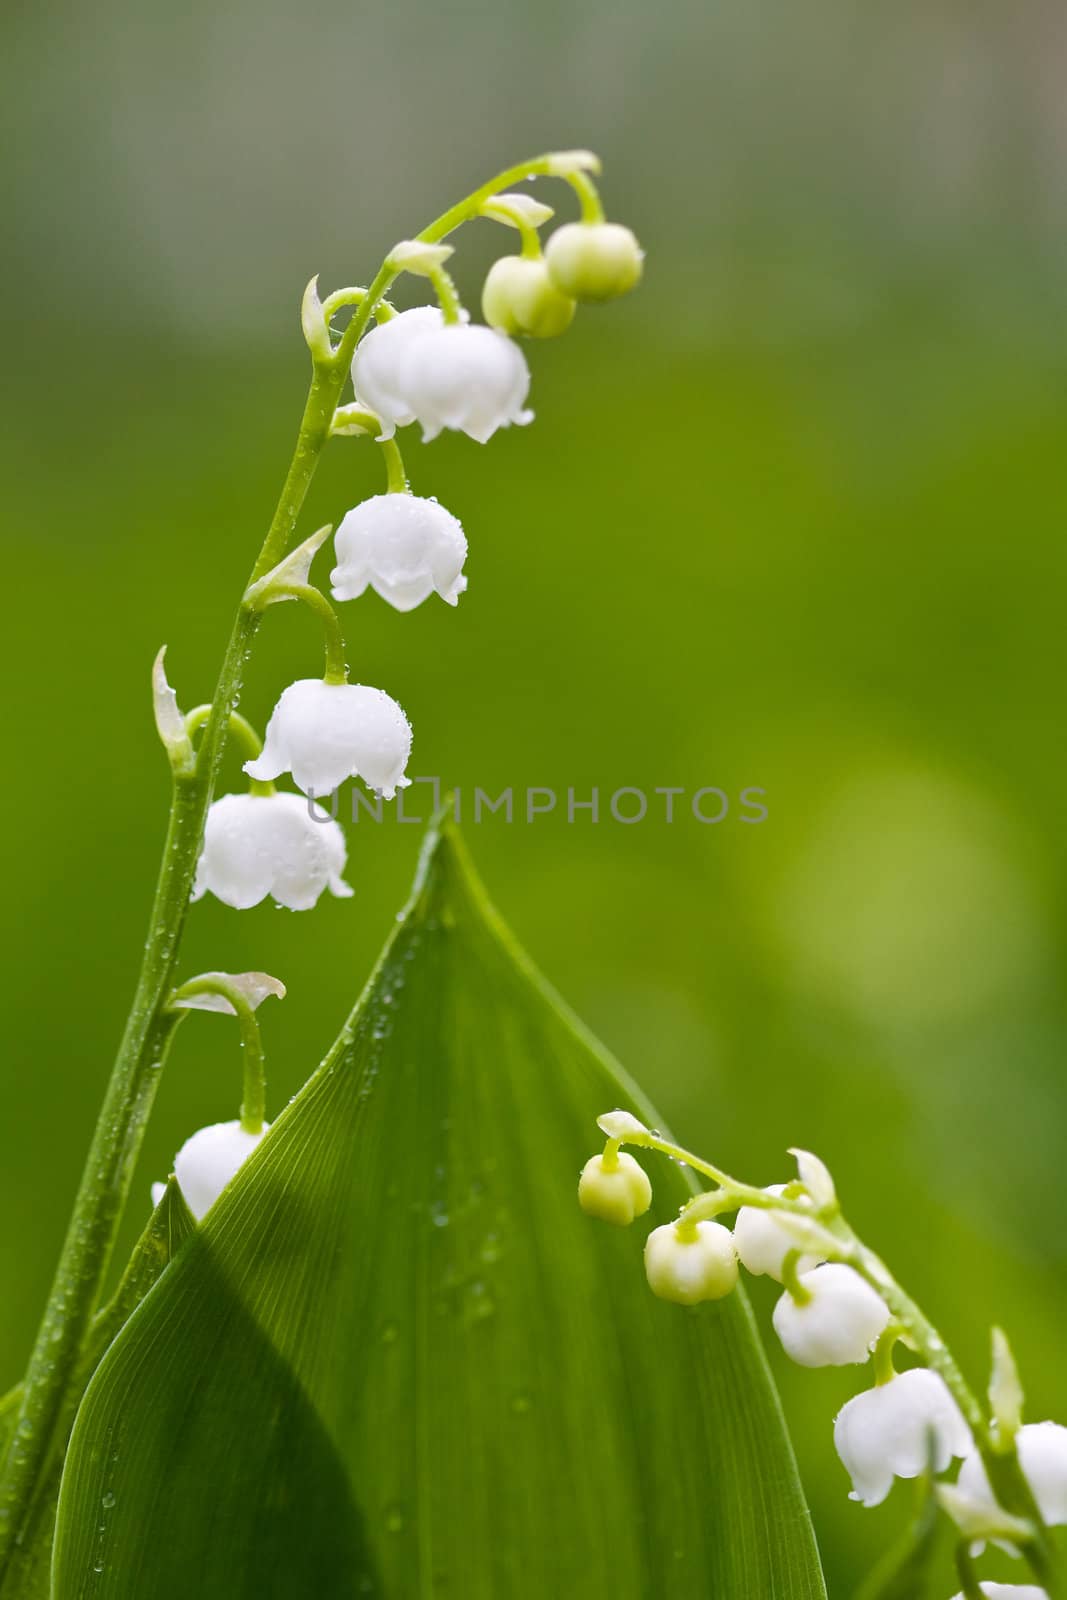 Lilies of the valley closeup by Gbuglok